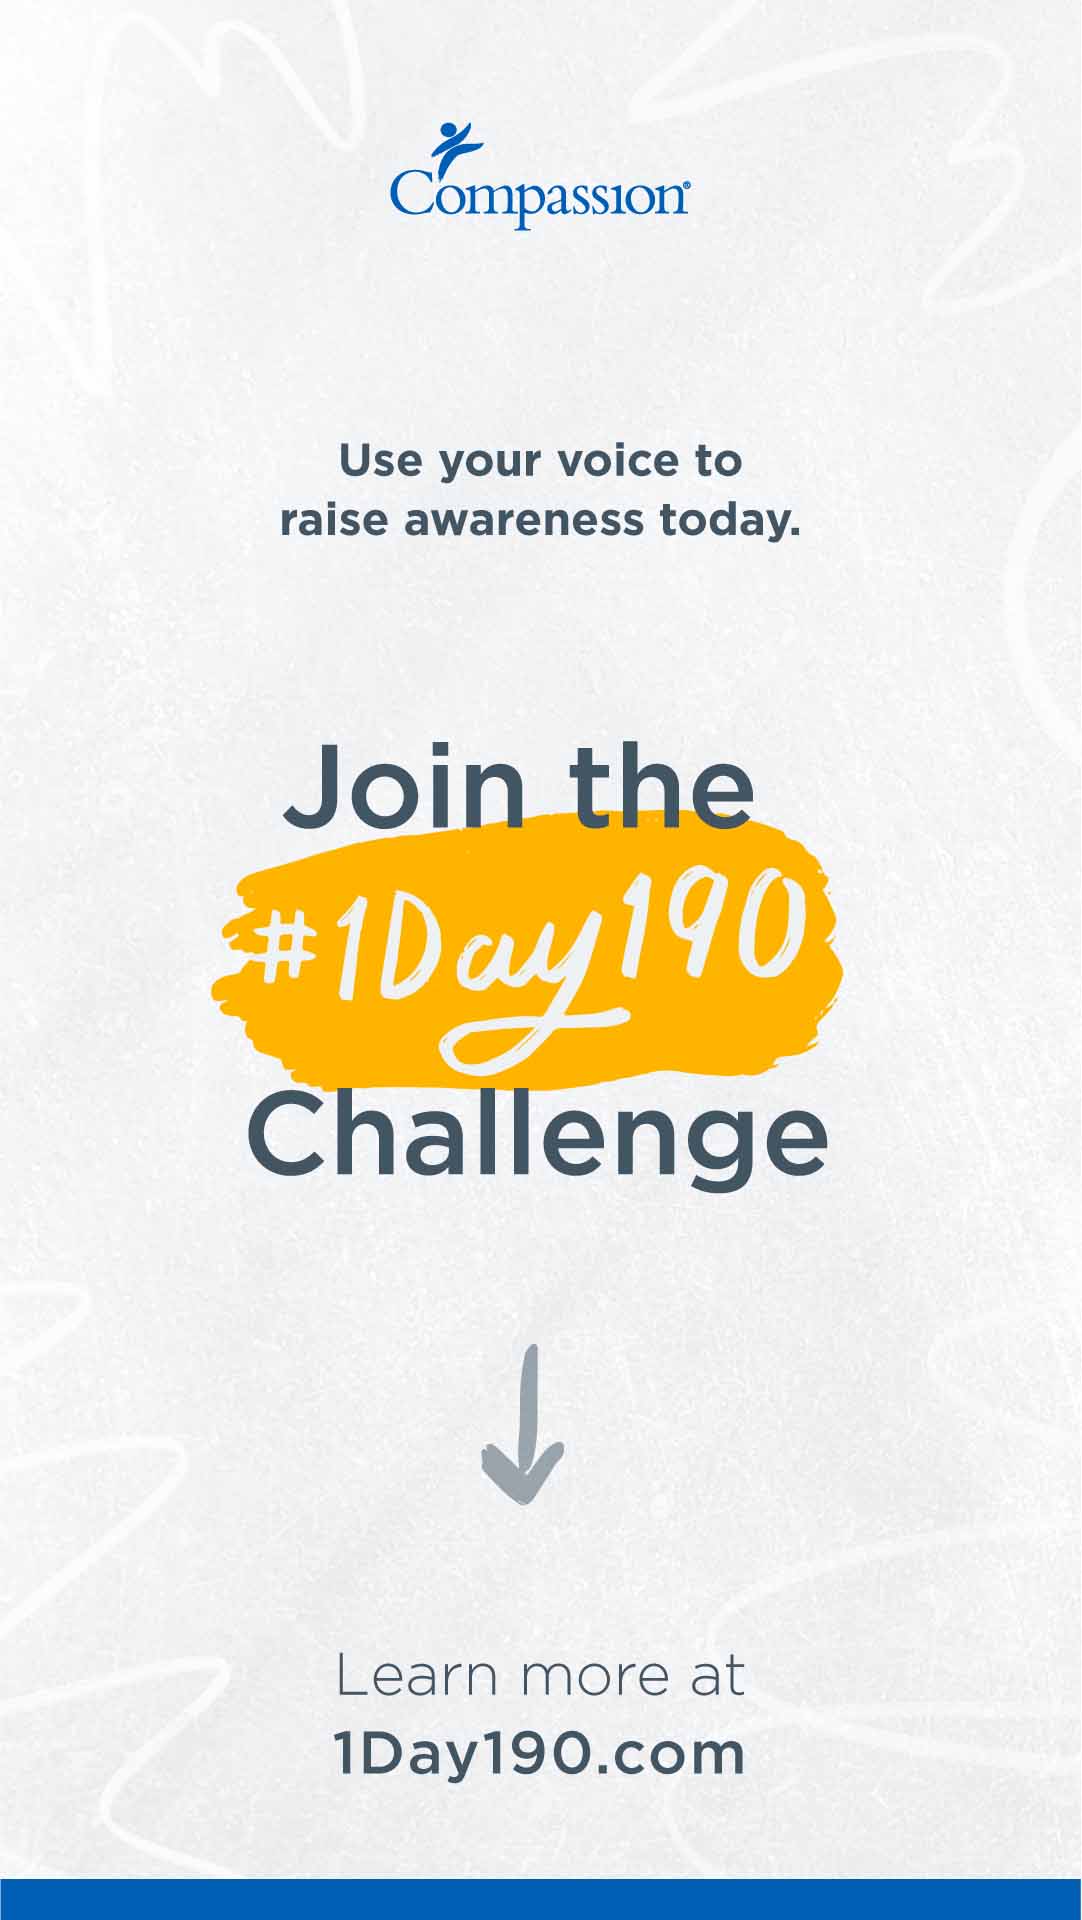 Join the 1day190 challenge